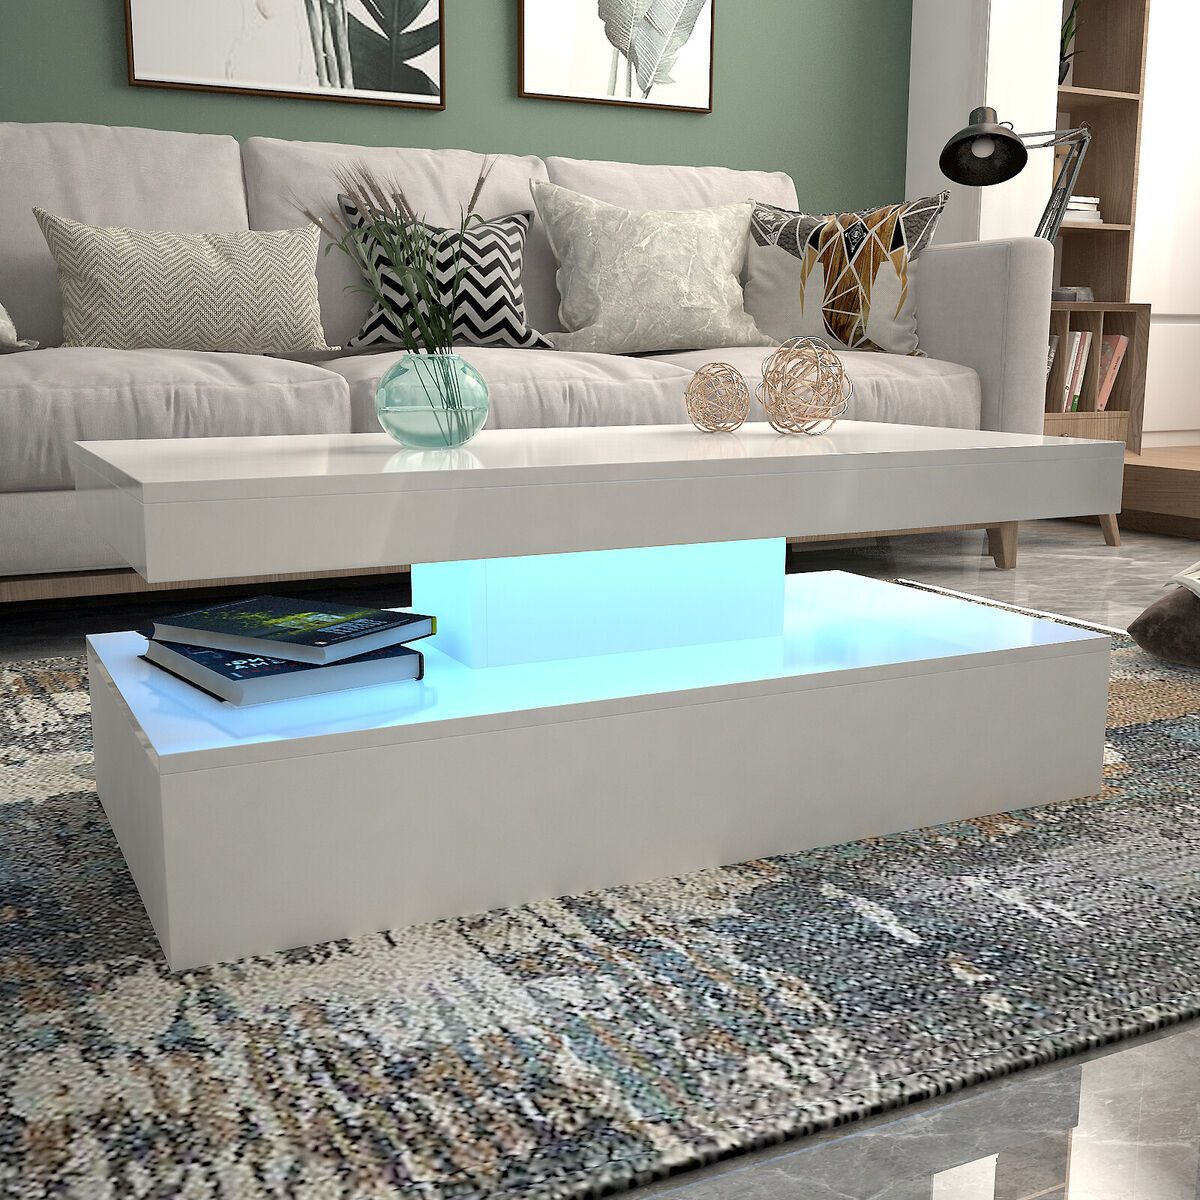 High Gloss Coffee Table For Living Room Rectangle Side Table Led Light  Furniture | Ebay In Rectangular Led Coffee Tables (View 14 of 15)